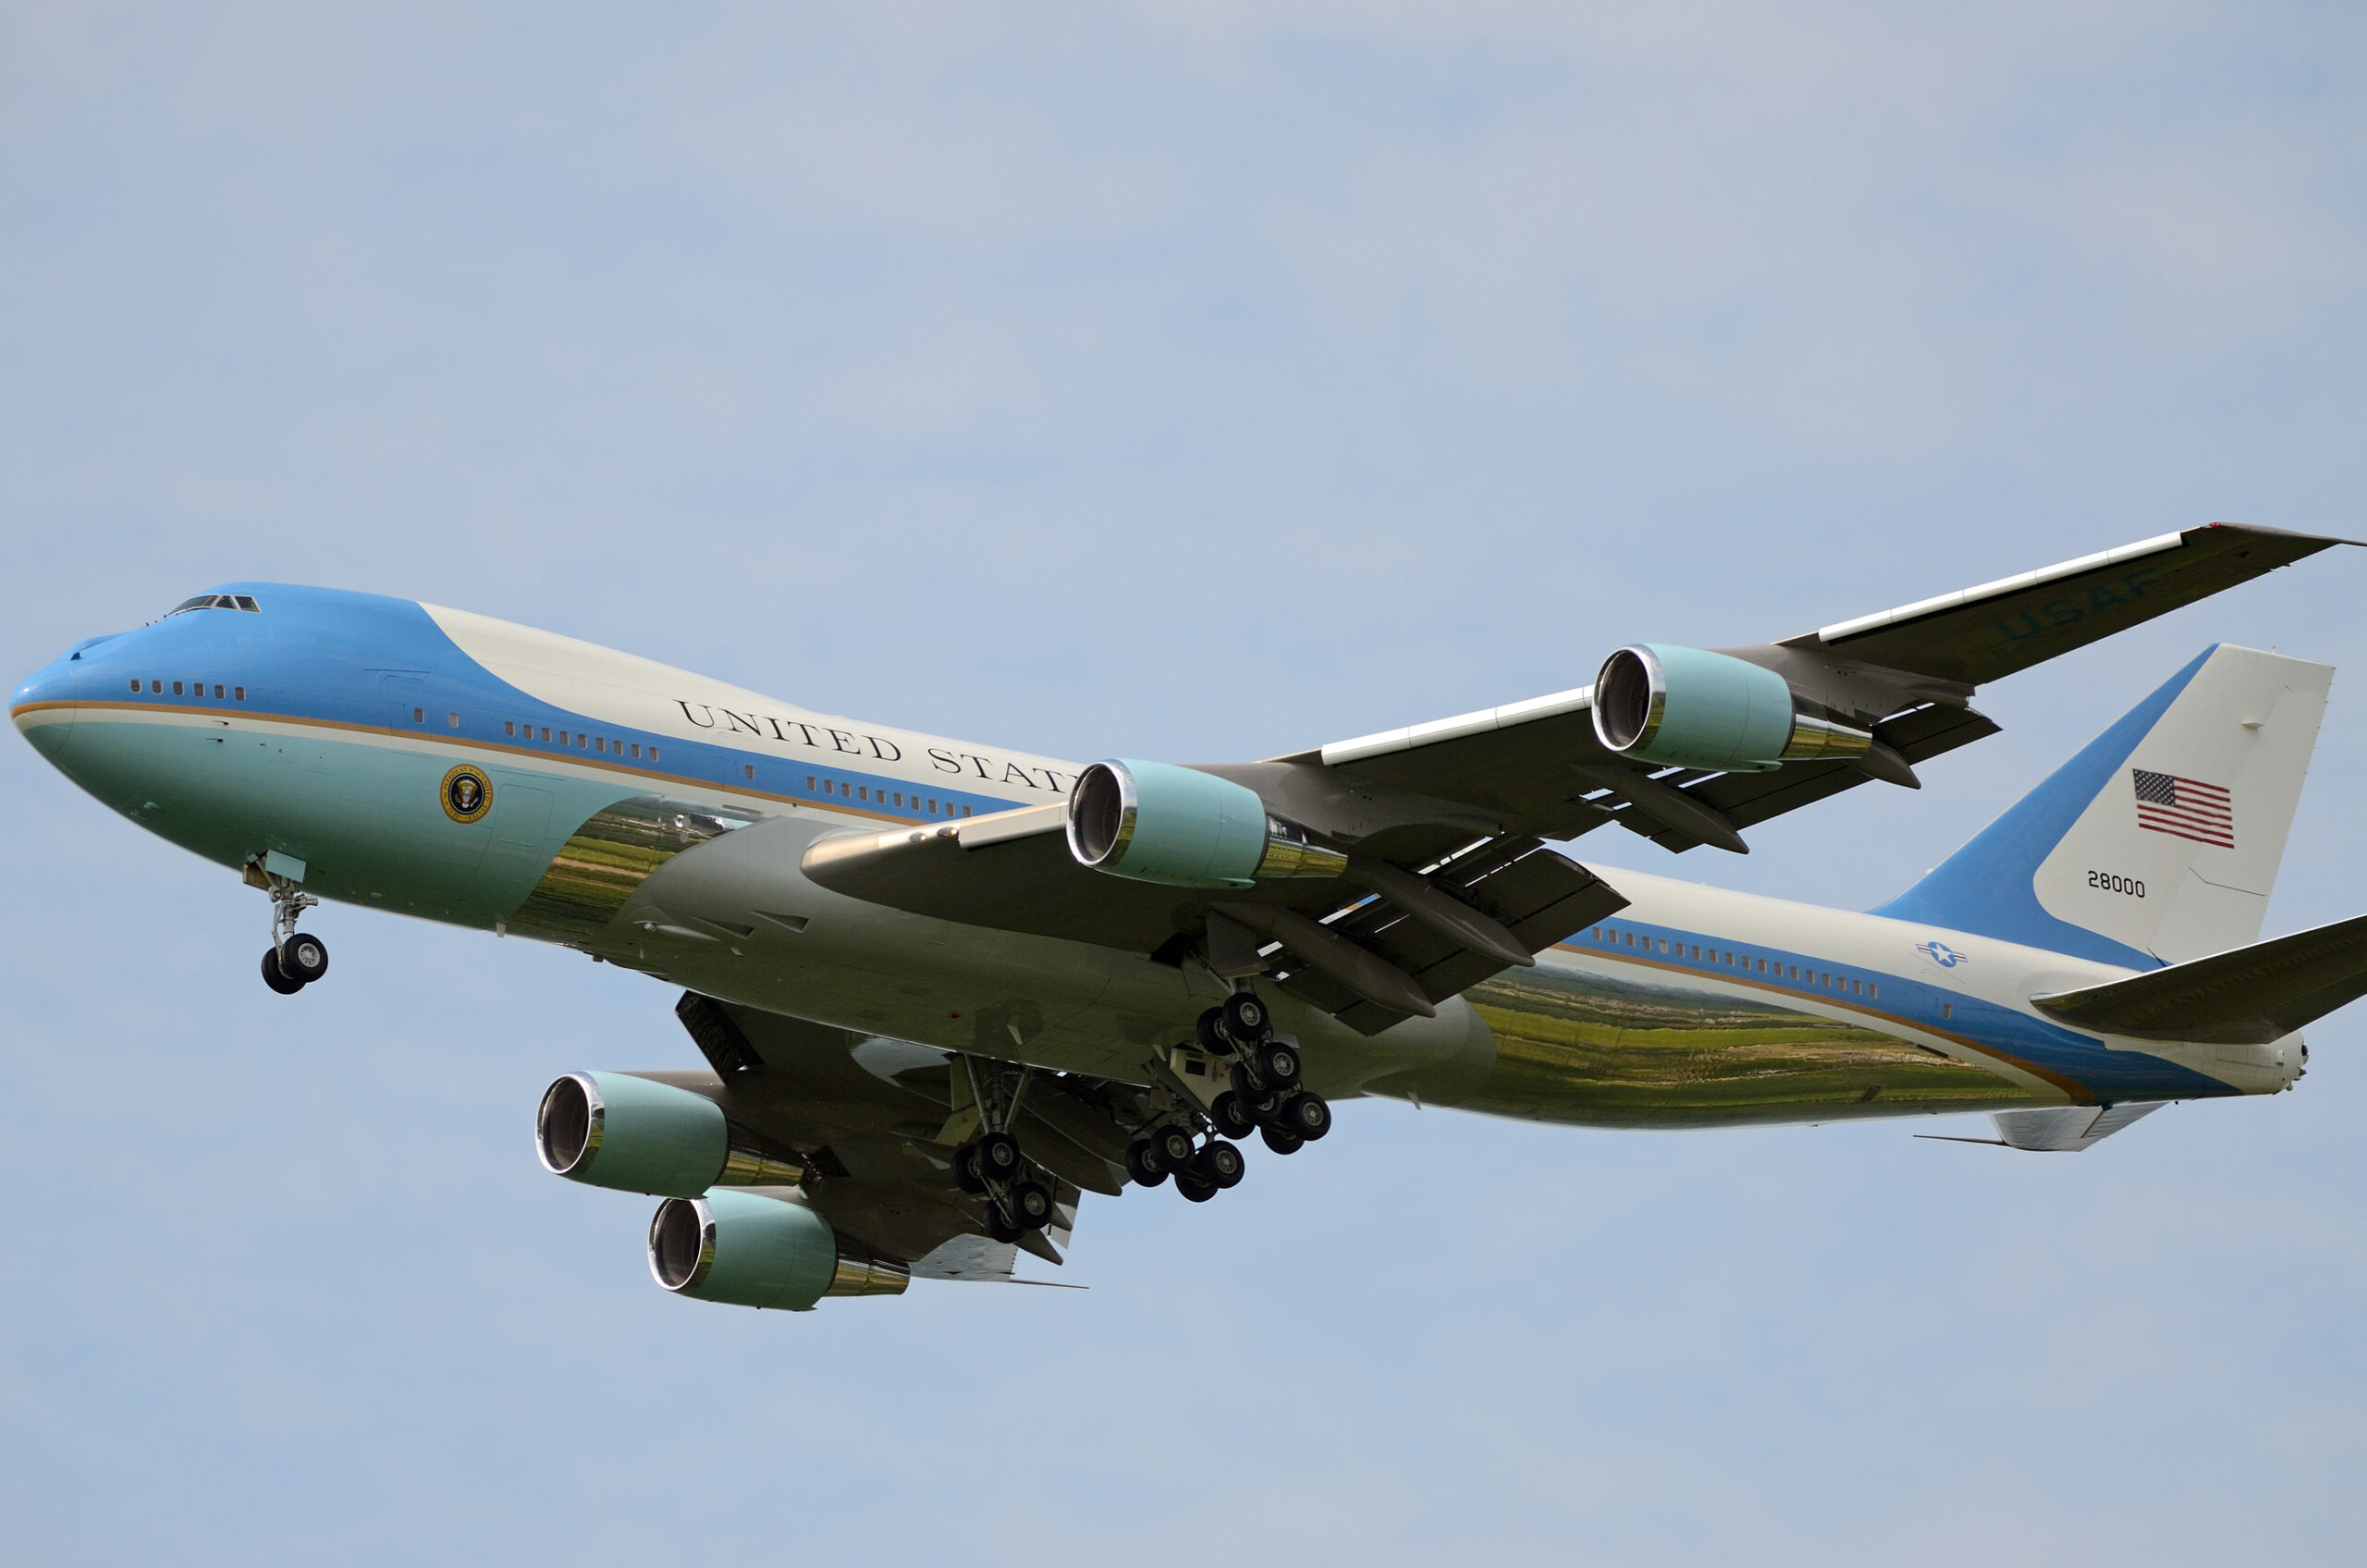 Air Force One Cost Overruns Demonstrate Expense of Imperial Presidency